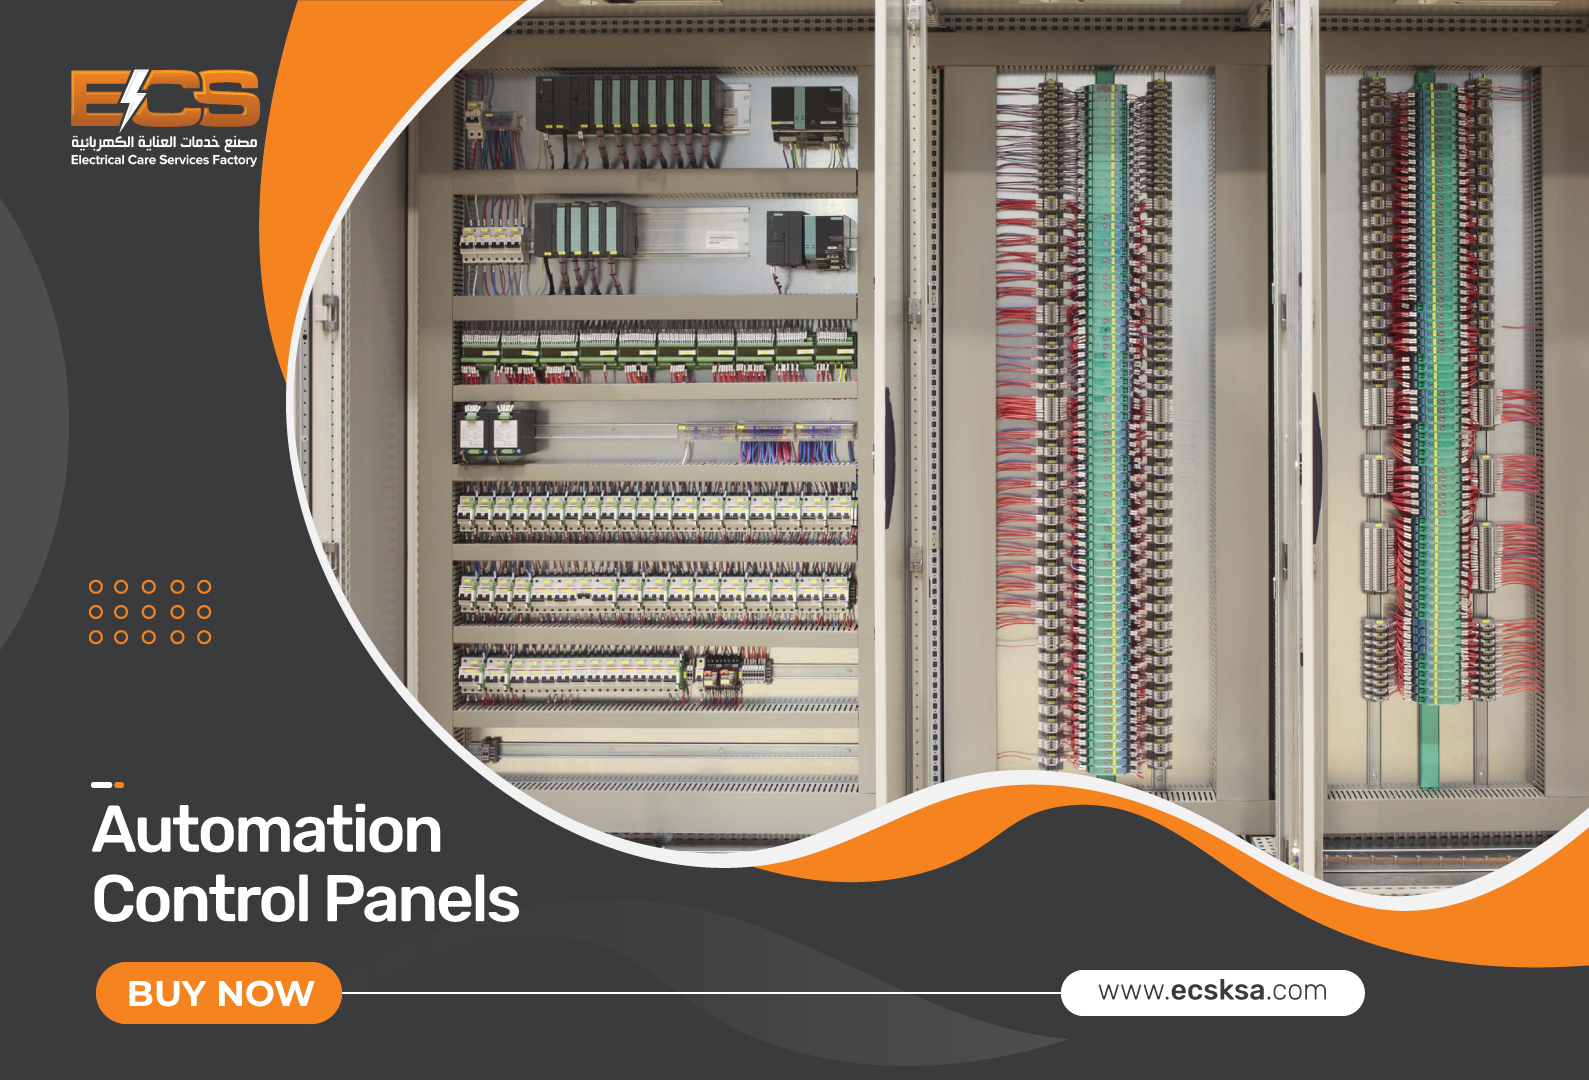 What are Automation Control Panels